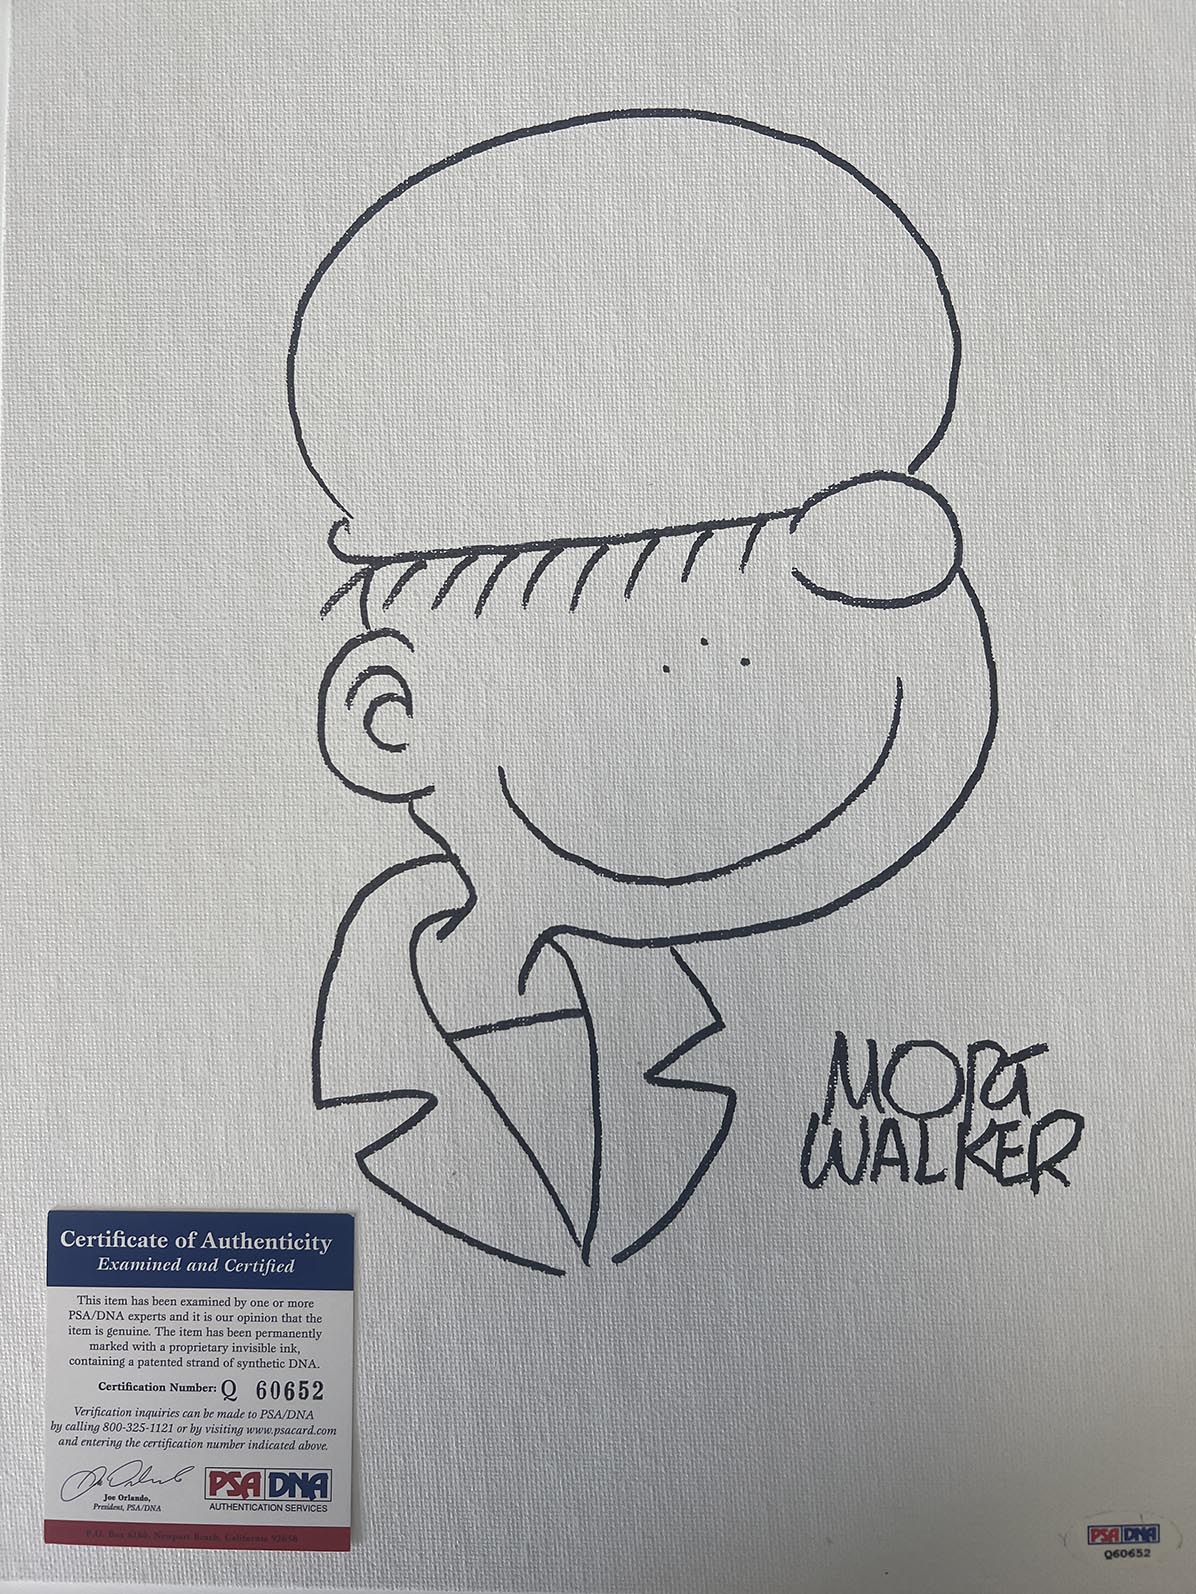 Mort Walker Beetle Bailey hand drawn and signed sketch. PSA